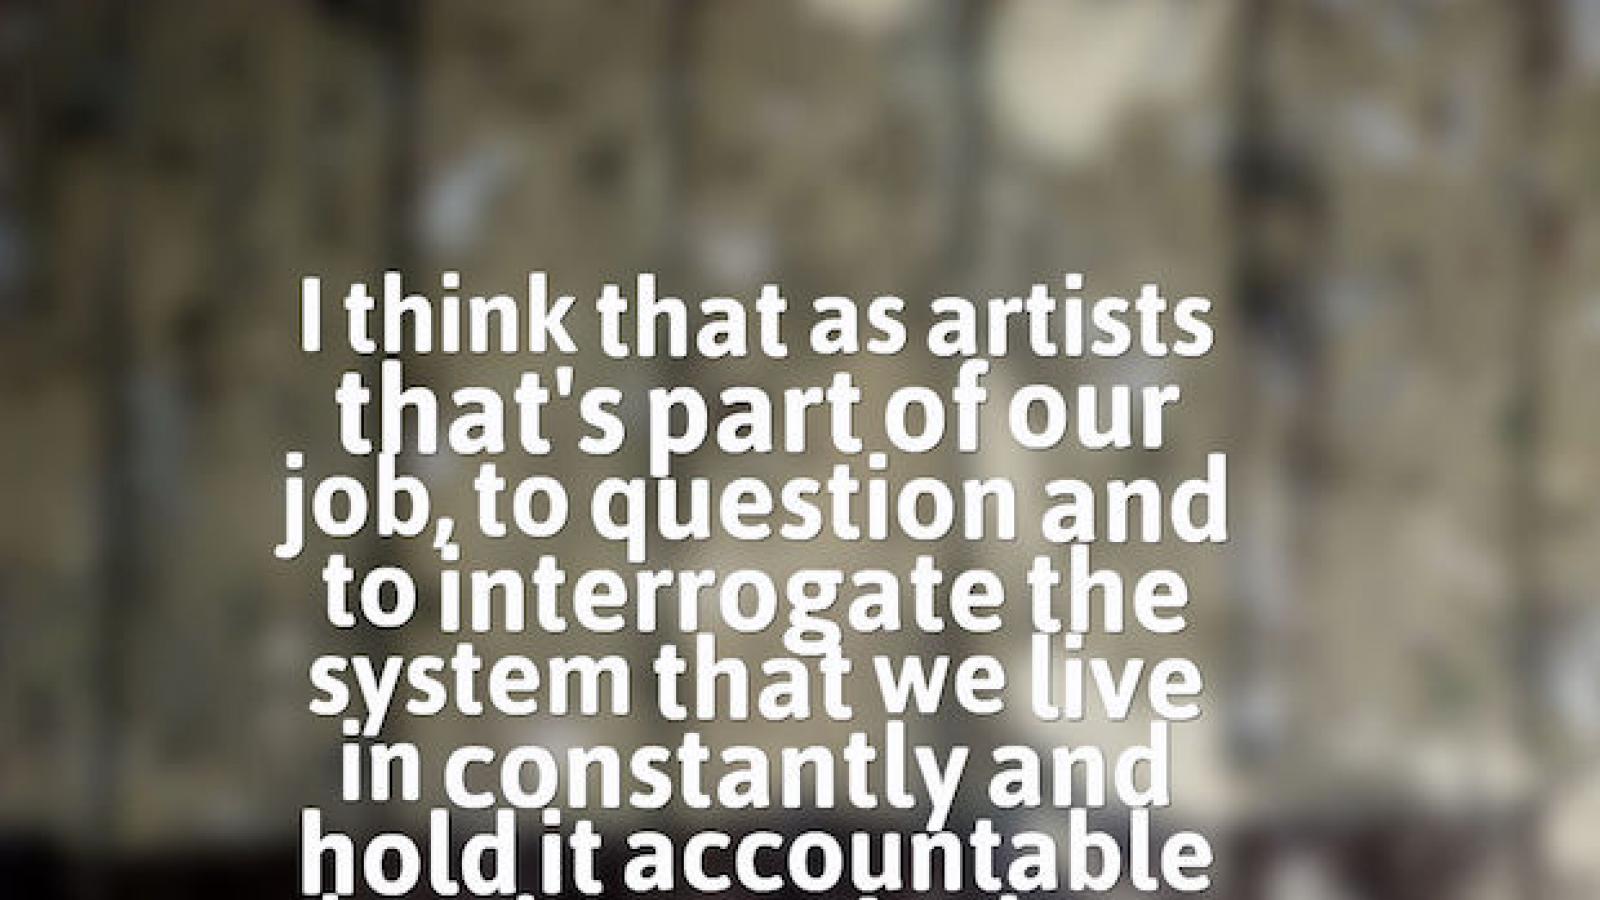 A quote by Shirlette Ammons: I think that as artists that's part of our job, to question and to interrogate the system that we live in constantly and hold it accountable and make sure it changes where it needs to change.